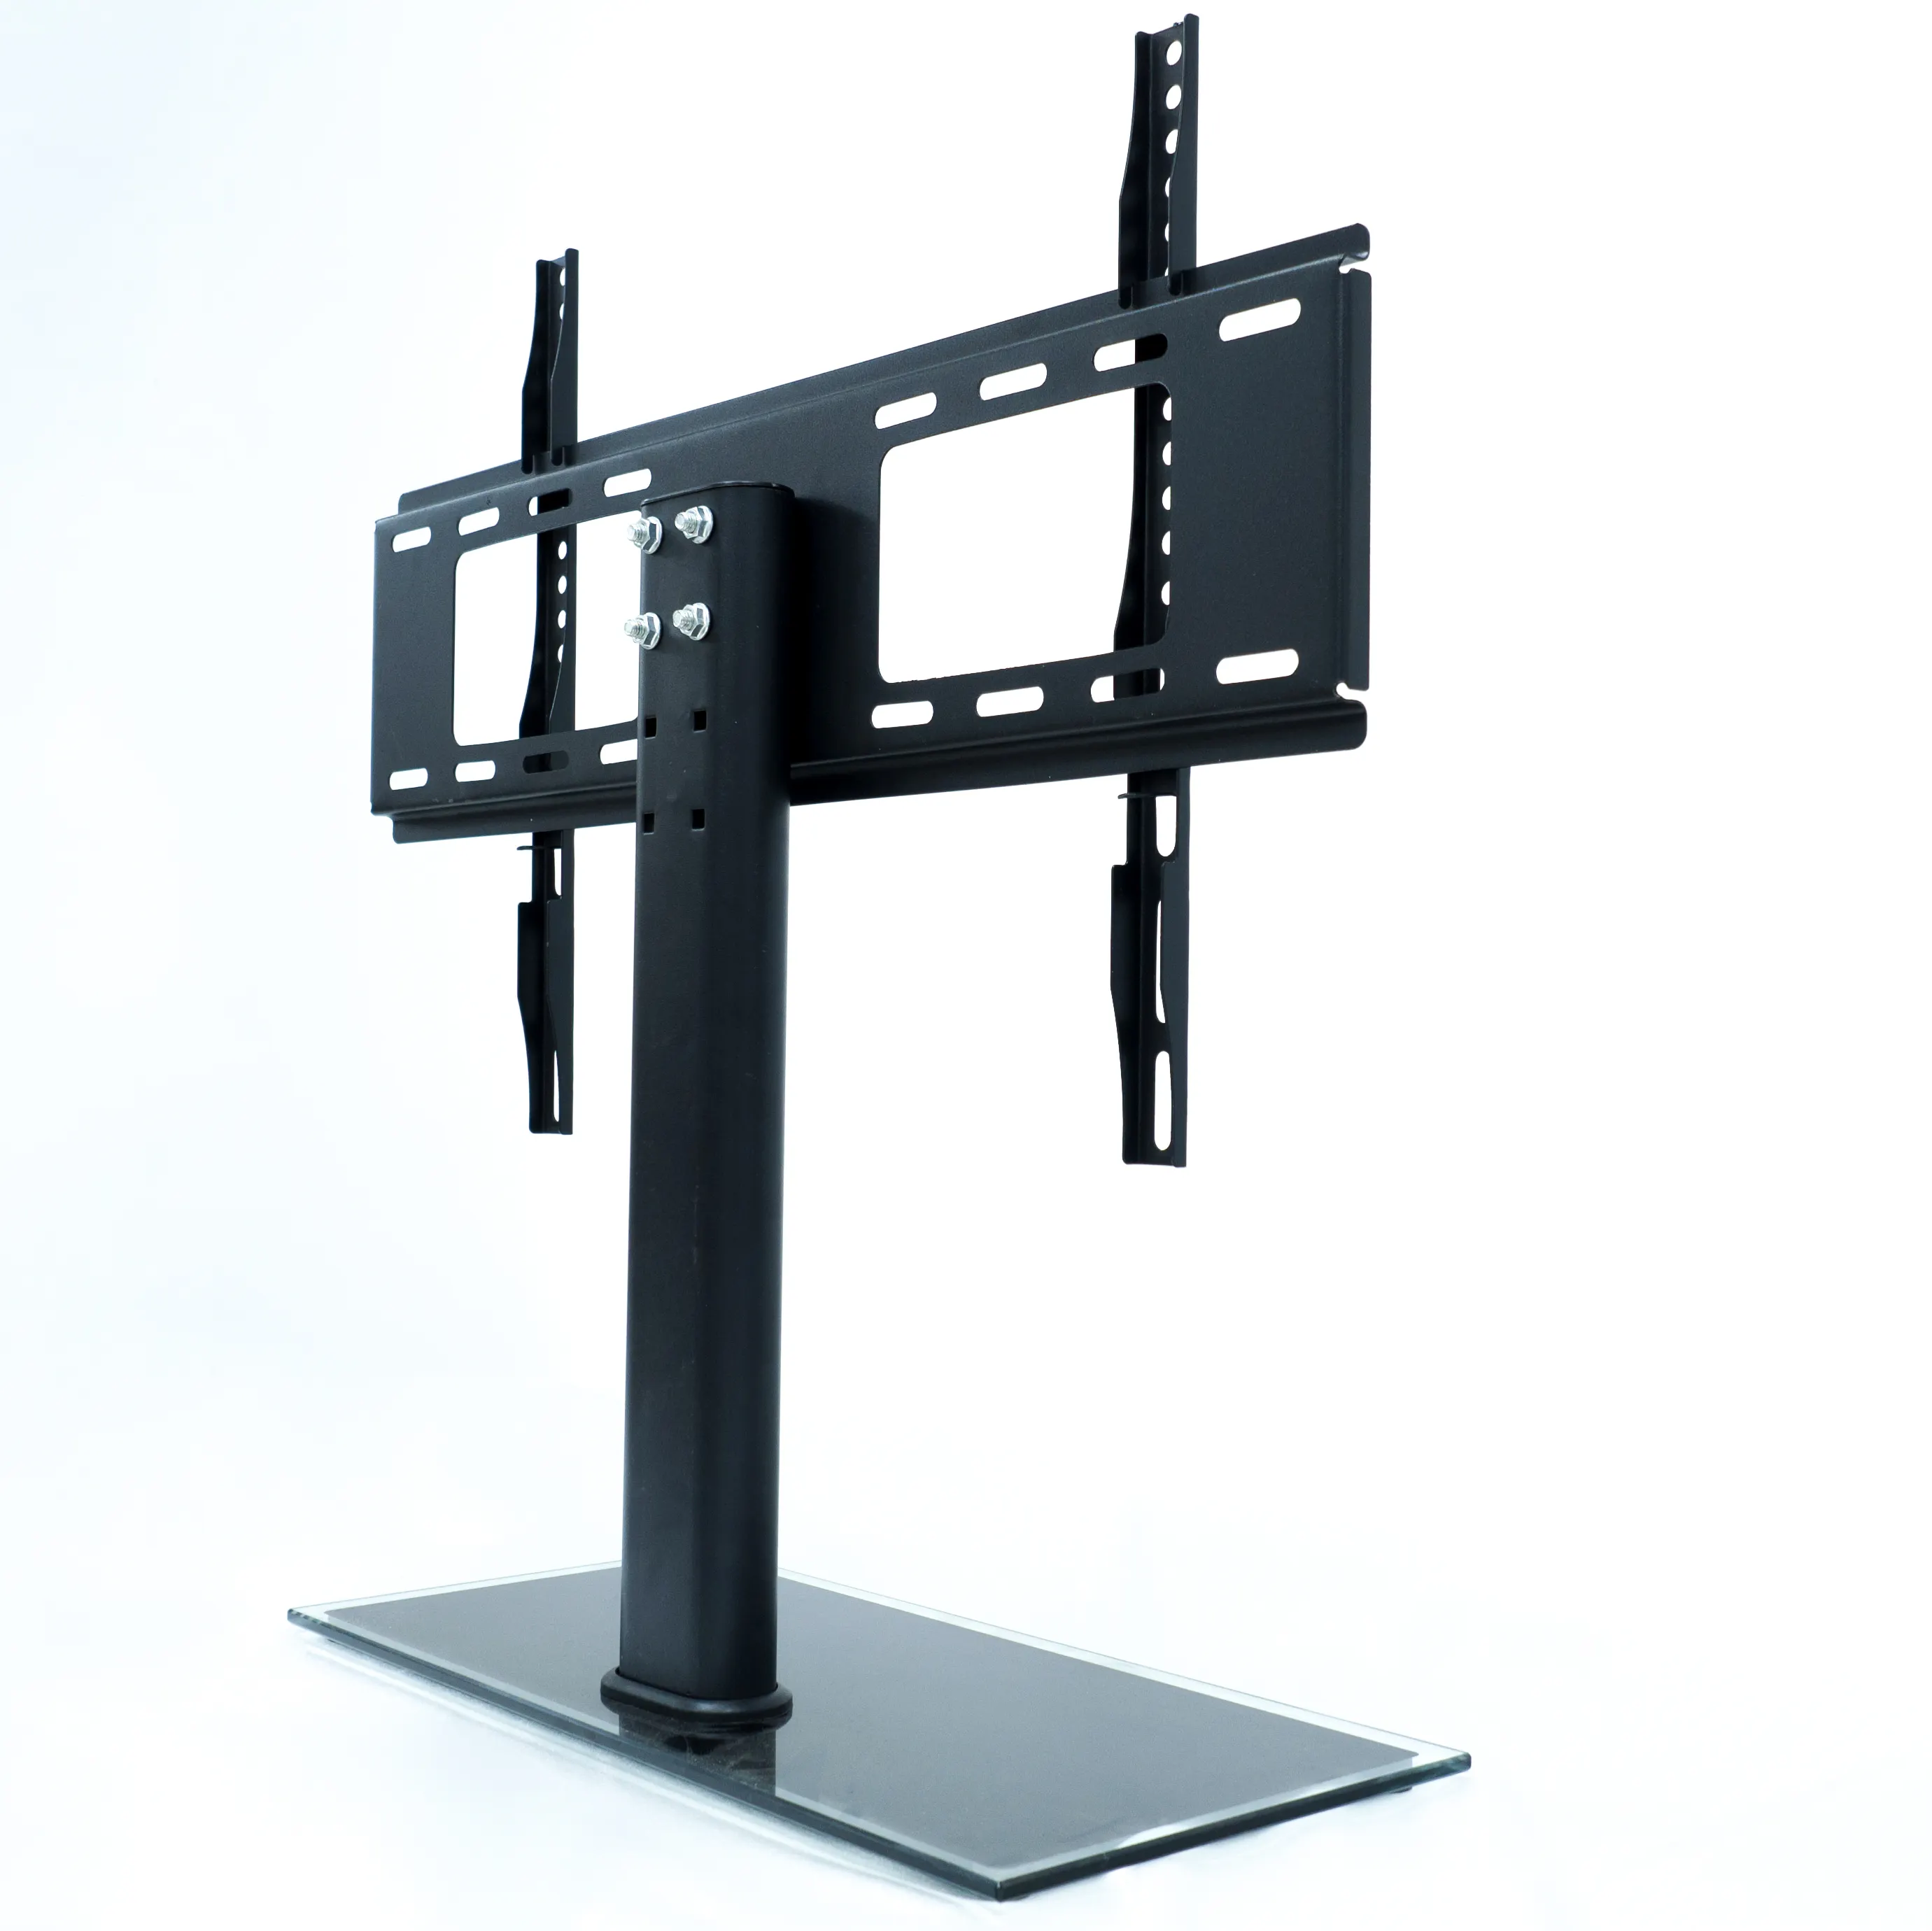 903 Hot Selling Tempered Glass Base Fits For 32-55 Inch Flat Screen Monitor Base Table TV Holder